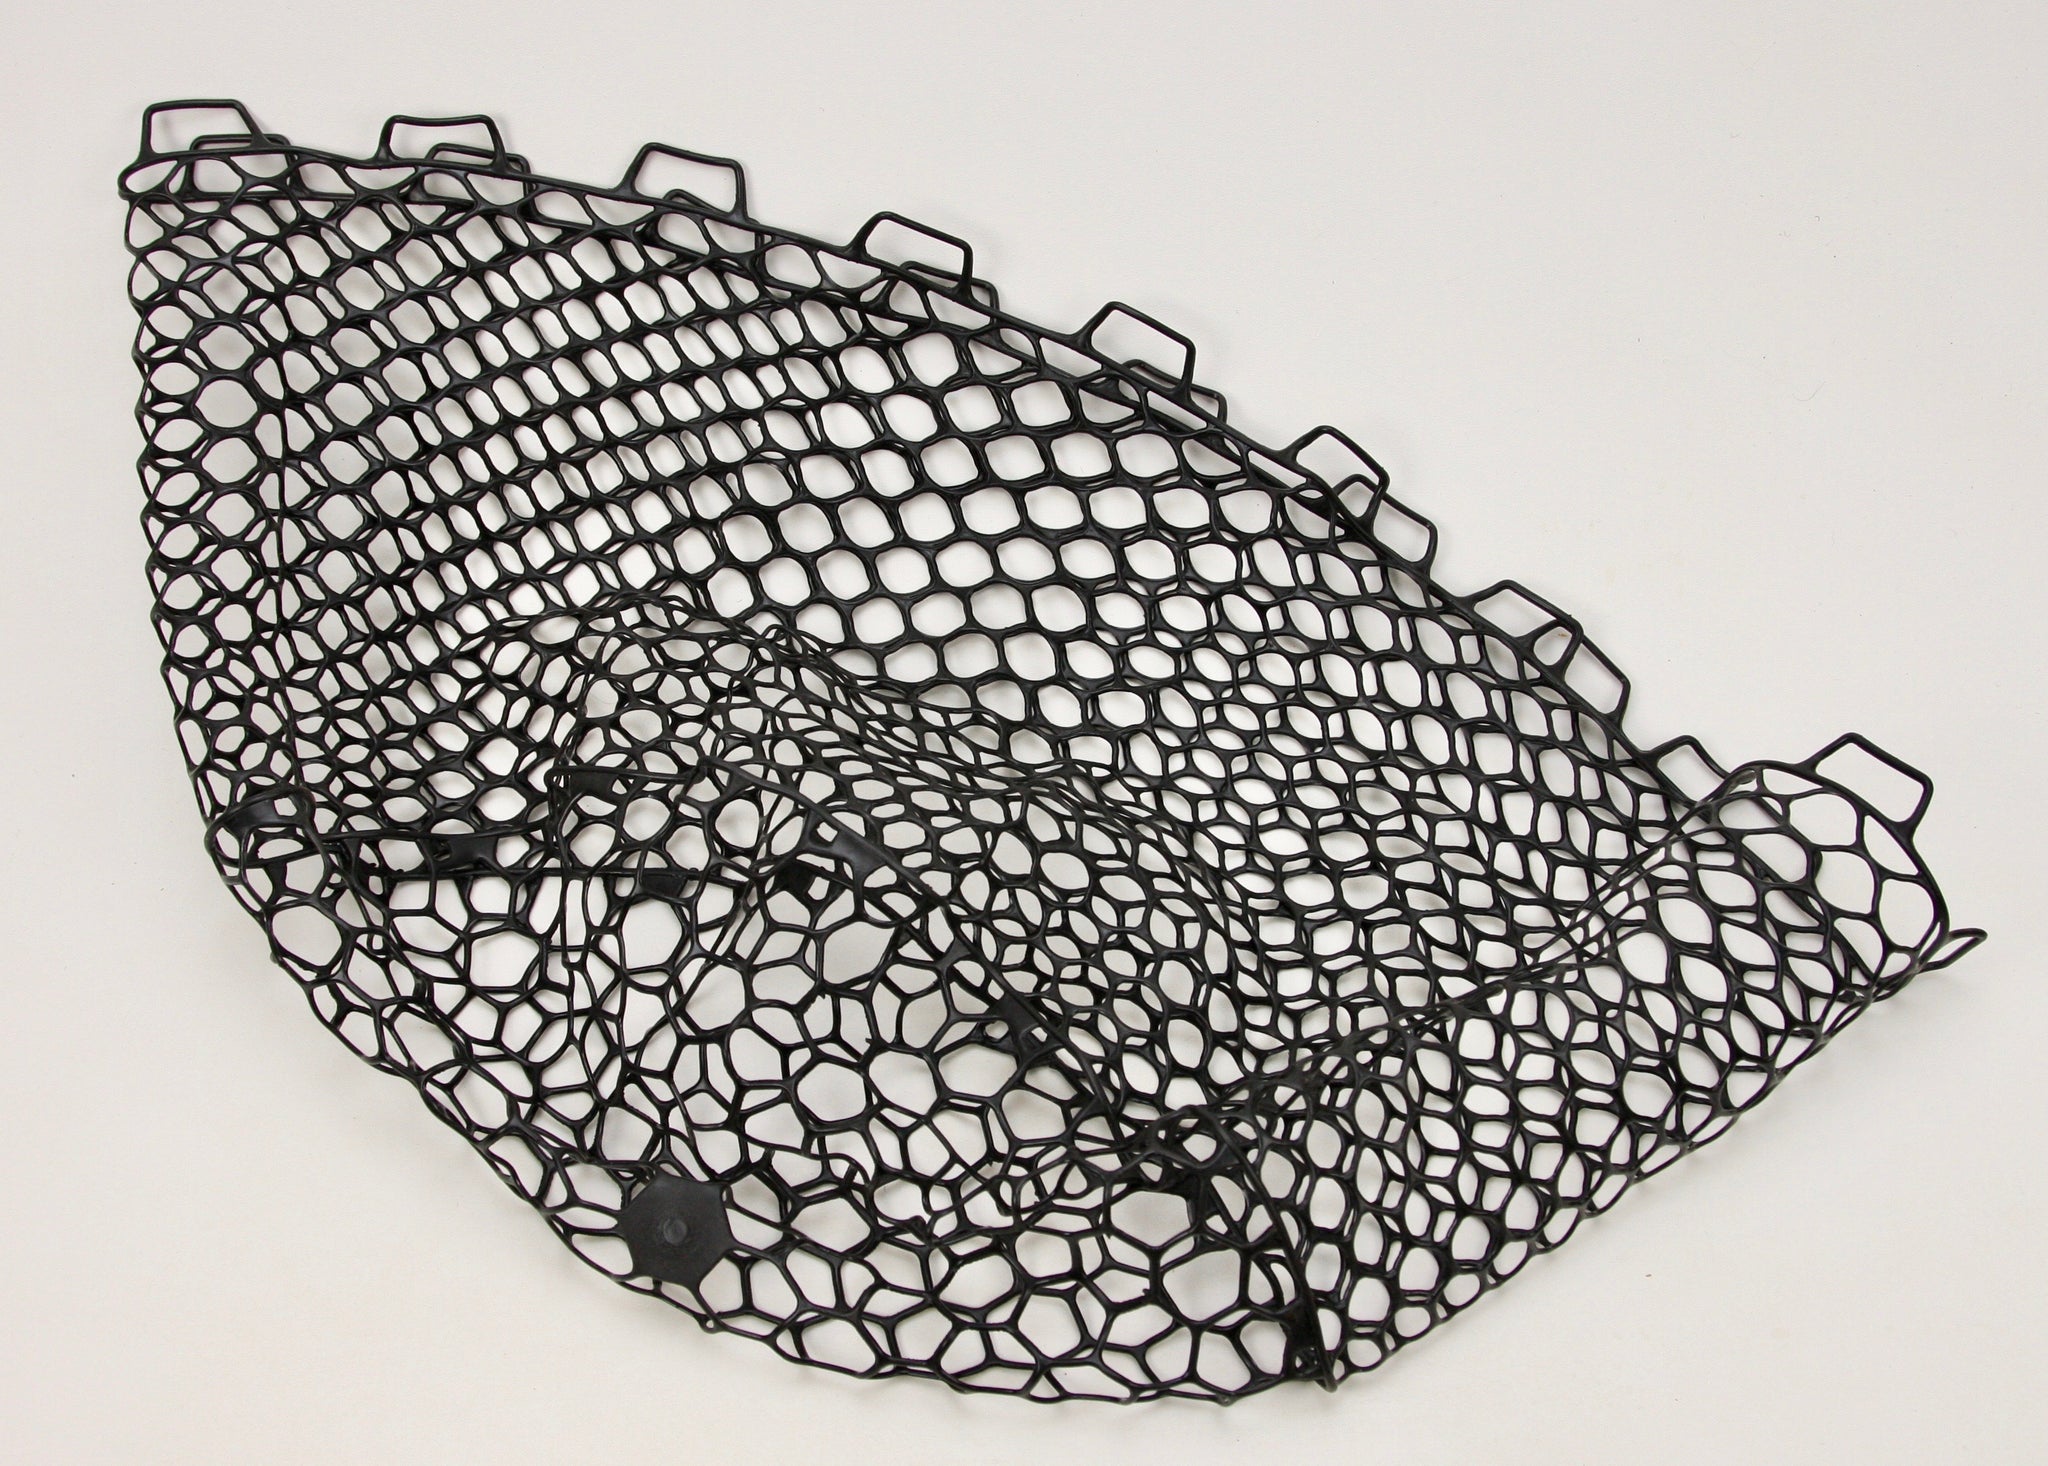 Rubber Net Bag China Trade,Buy China Direct From Rubber Net Bag